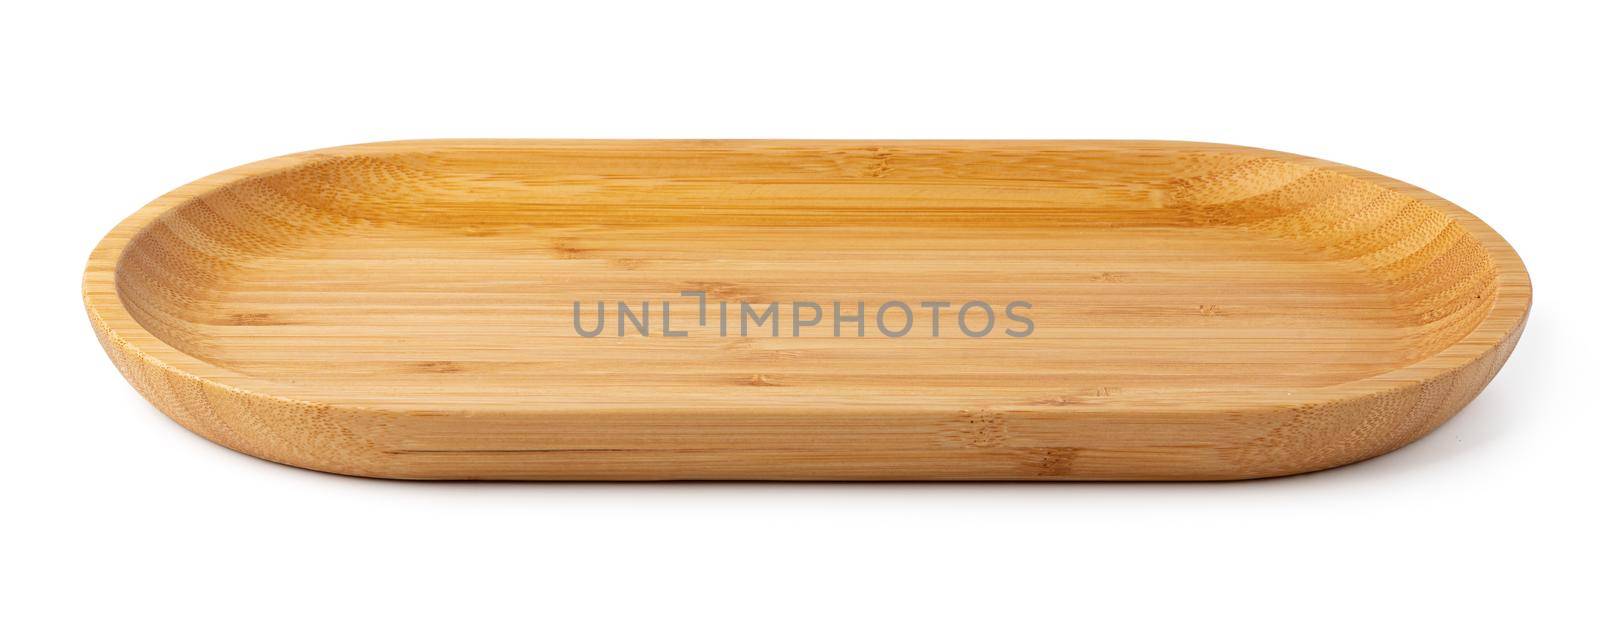 Wooden plate isolated on white background, close up photo